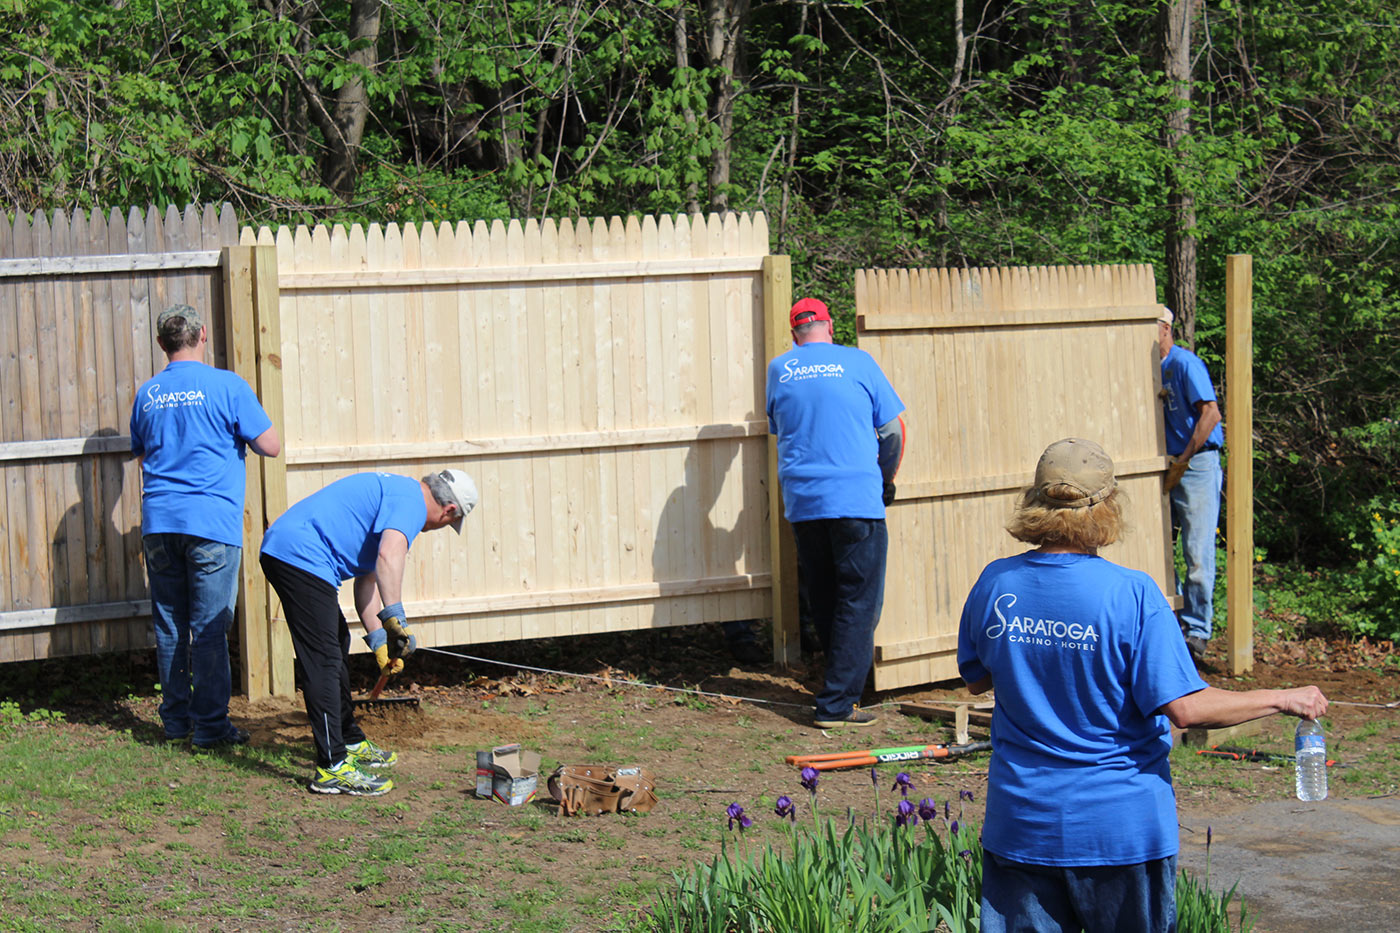 Men building a wooden fence and doing spring clean-up at the backyard